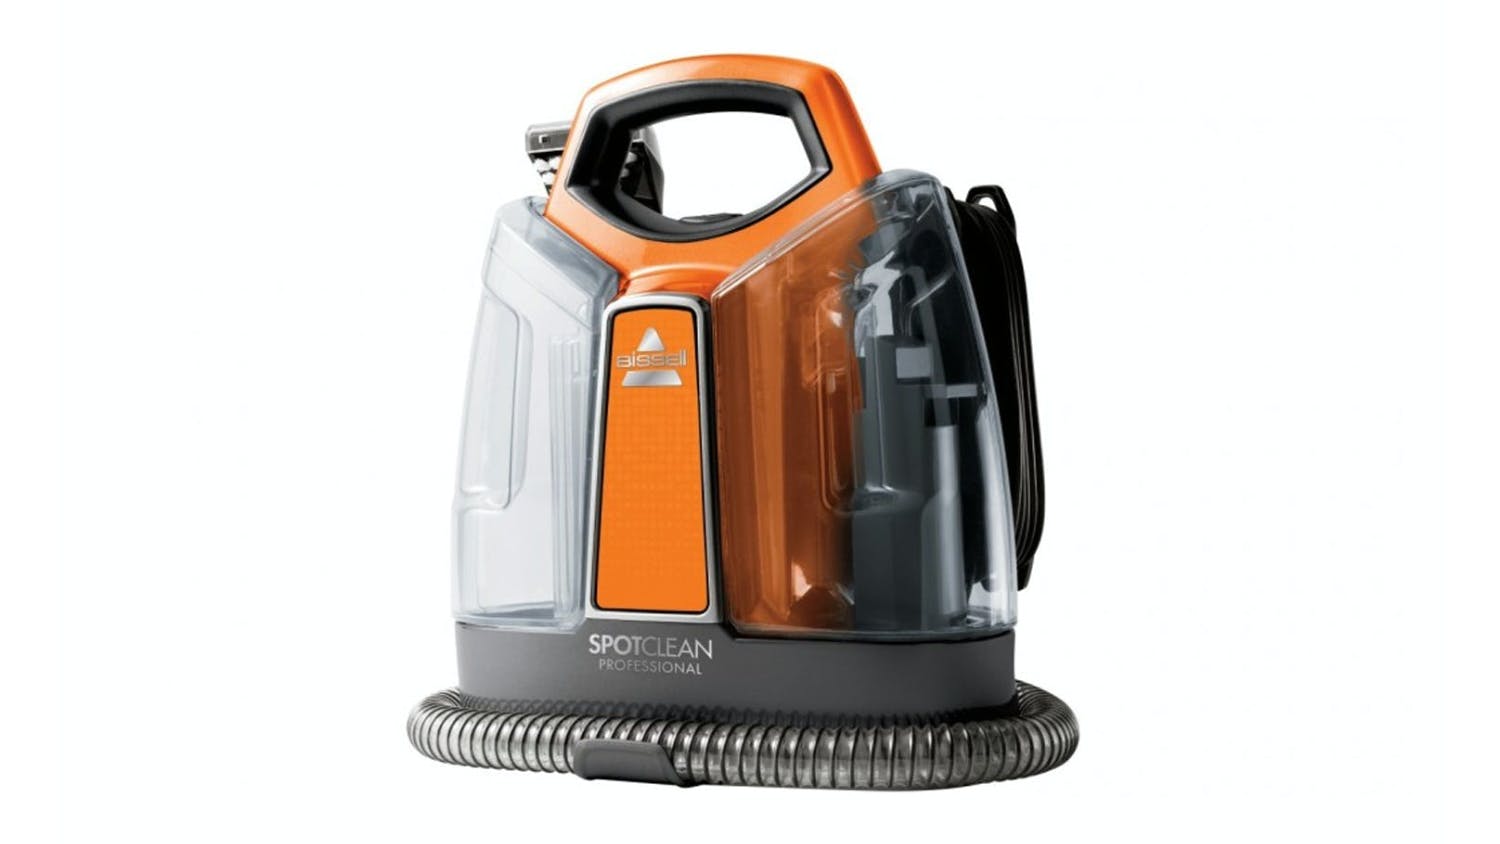 How to get the best out of your BISSELL SpotClean Pro 